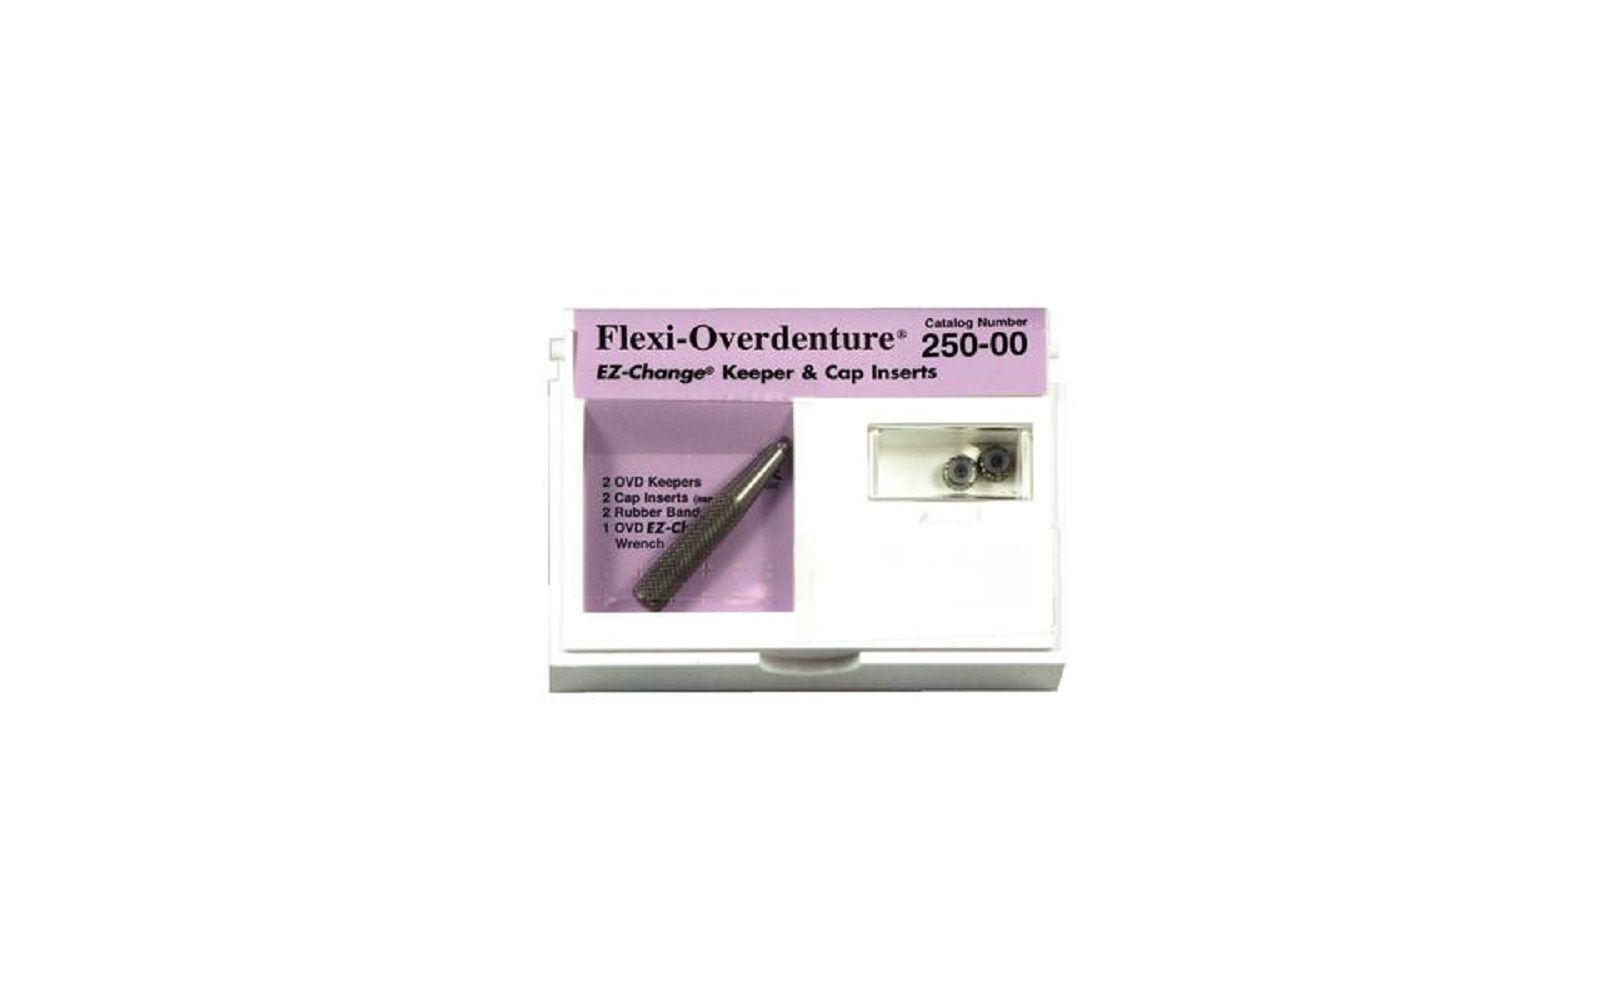 Flexi-overdenture® ez-change® keeper and cap inserts, intro kit